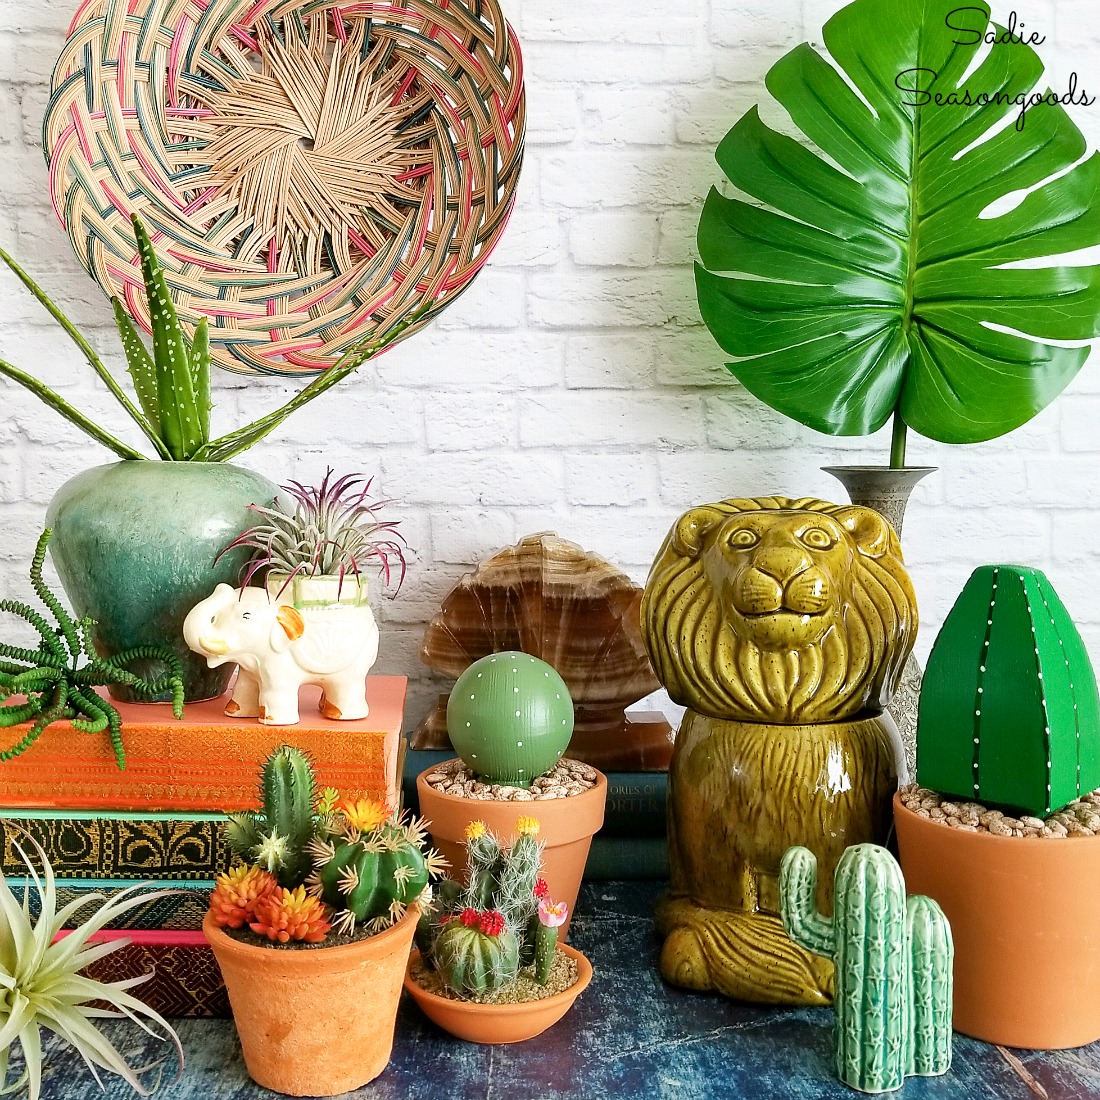 Thrift shopping for boho decor and upcycling ideas for fake cactus or succulents